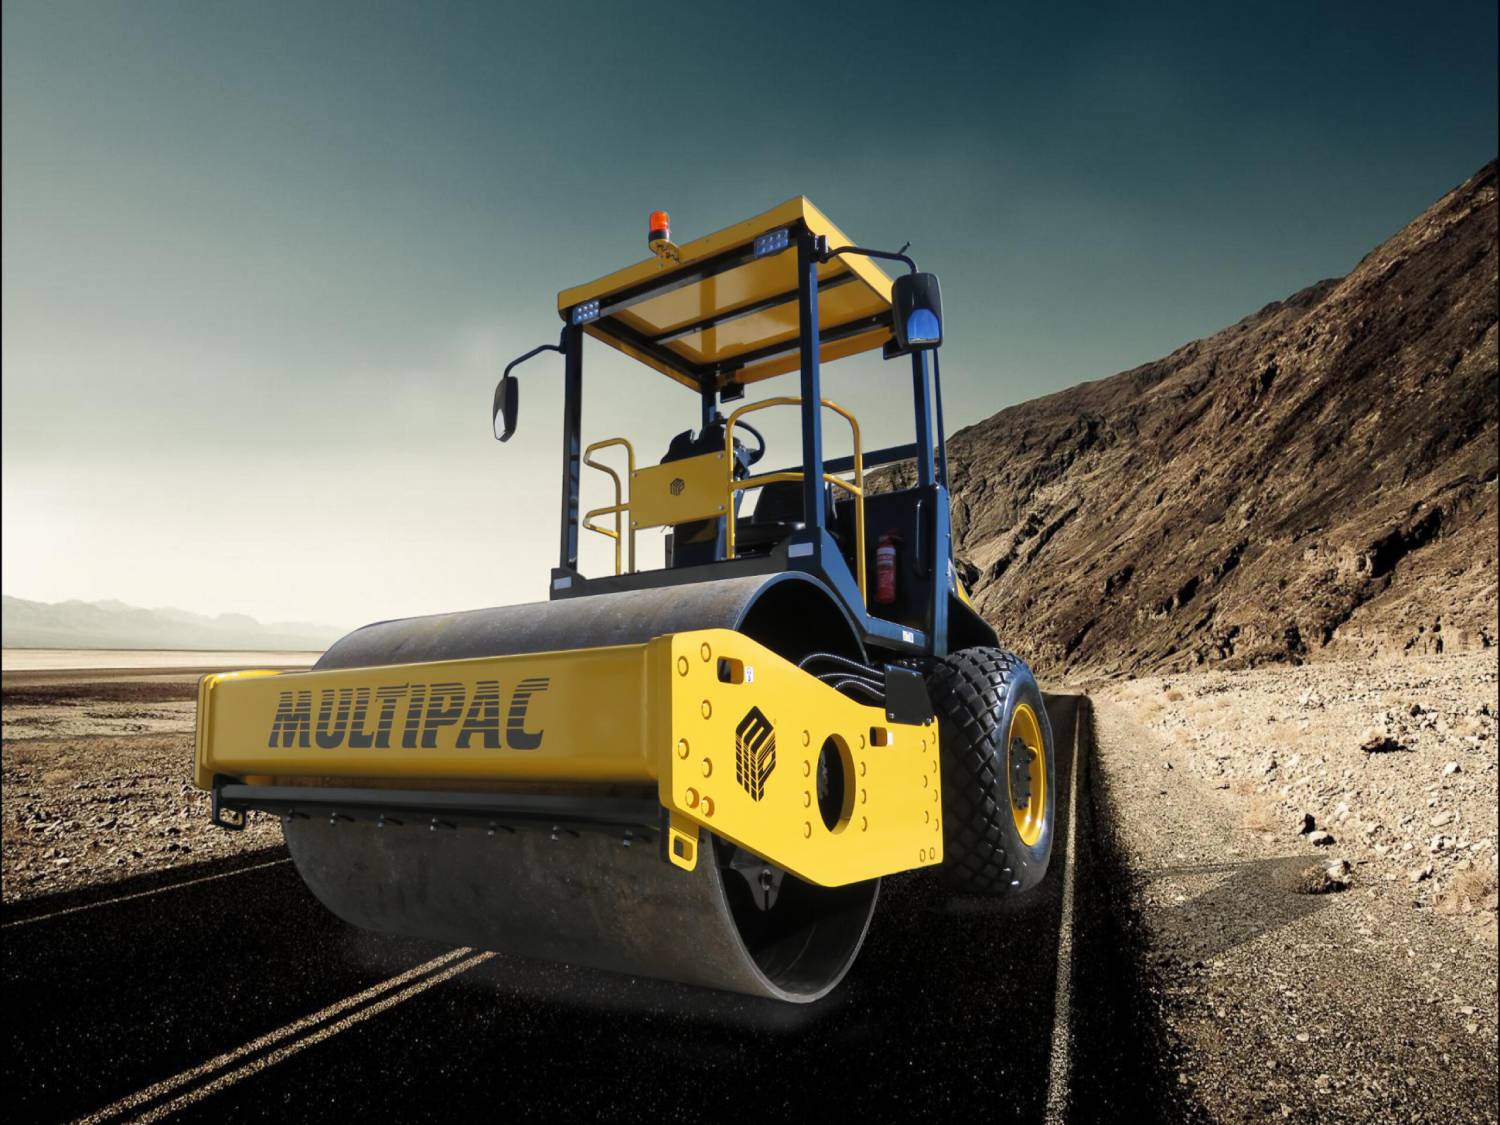 Multipac 107H Compaction Roller in the desert